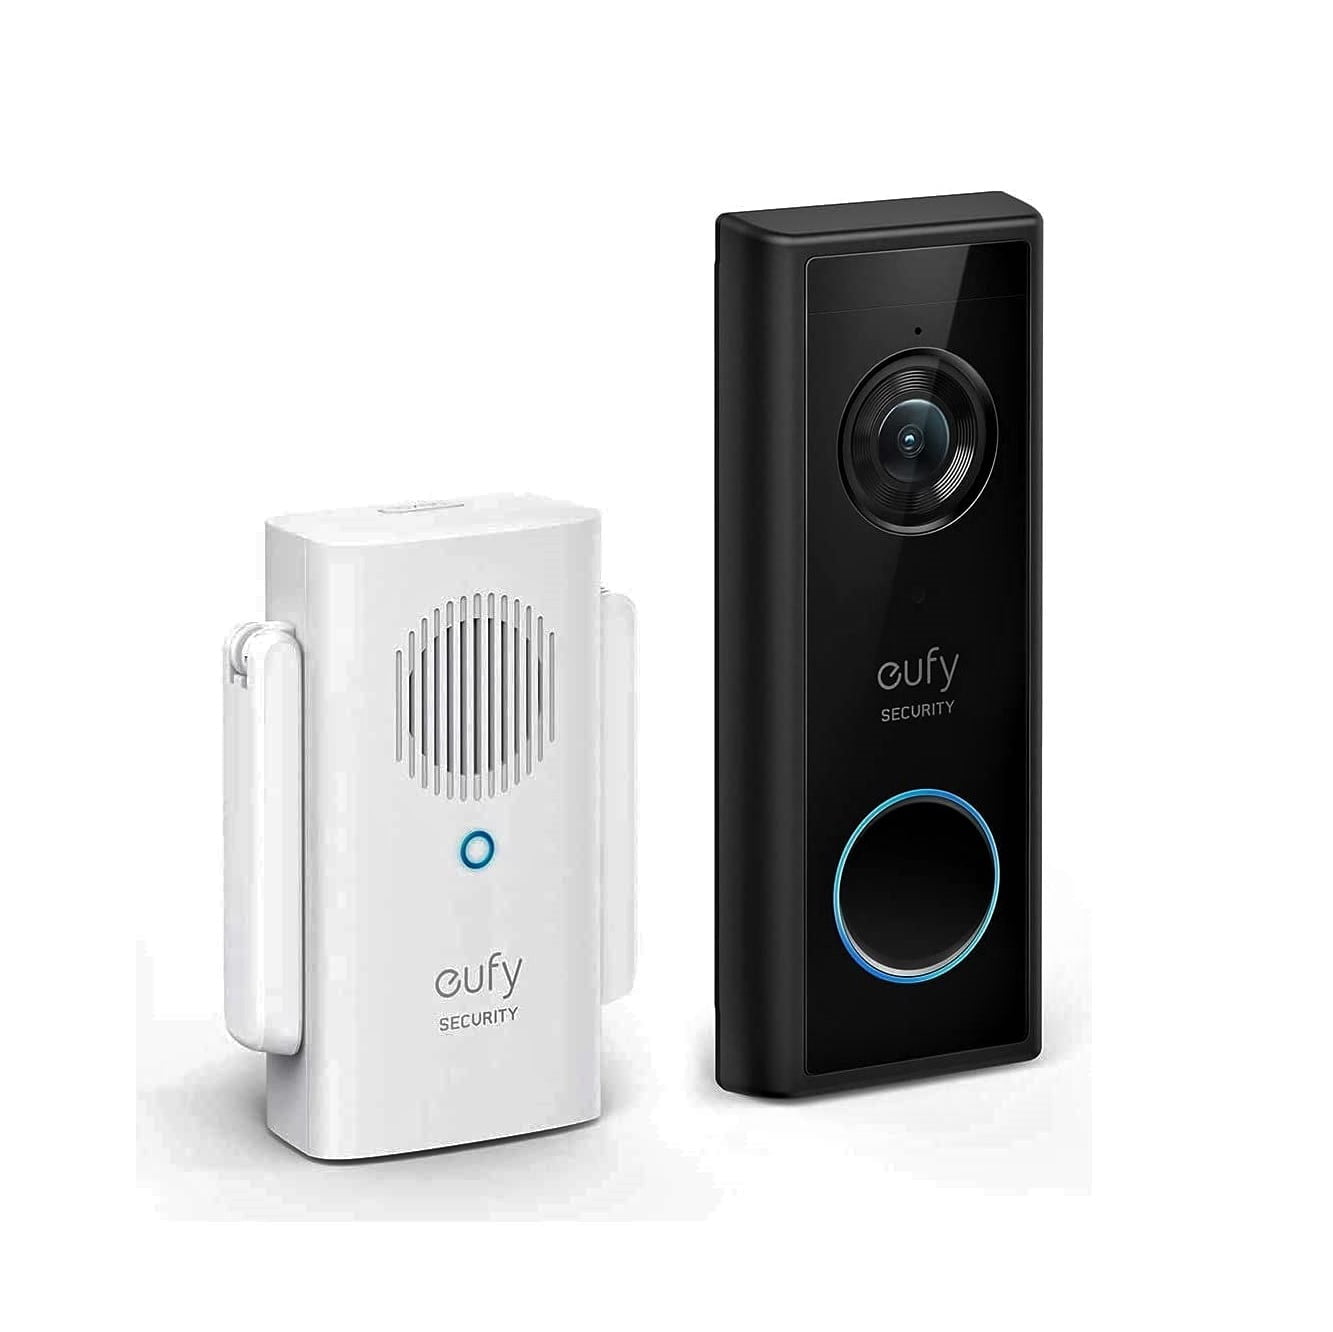 Eufy Security Wireless Video Doorbell review: Very high-res video and no  subscription needed